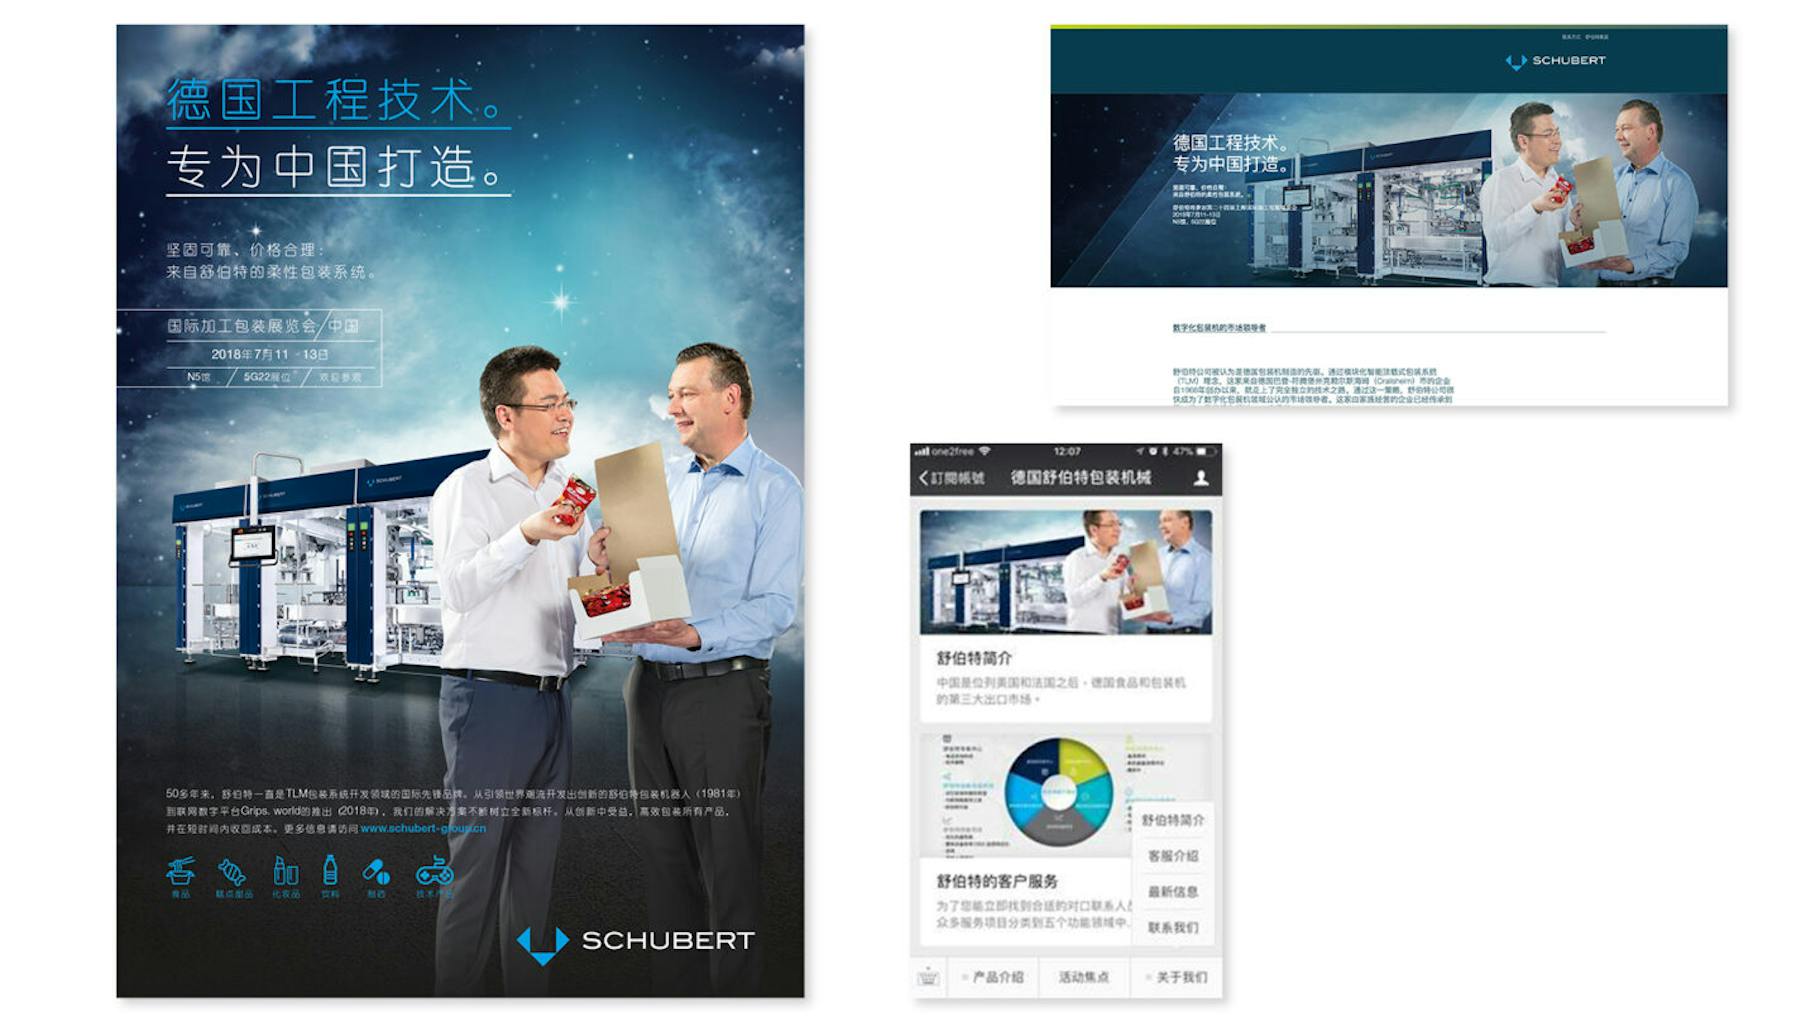 Excerpts from Chinese adverts for Gerhard Schubert GmbH, created by a b2b marketing agency 